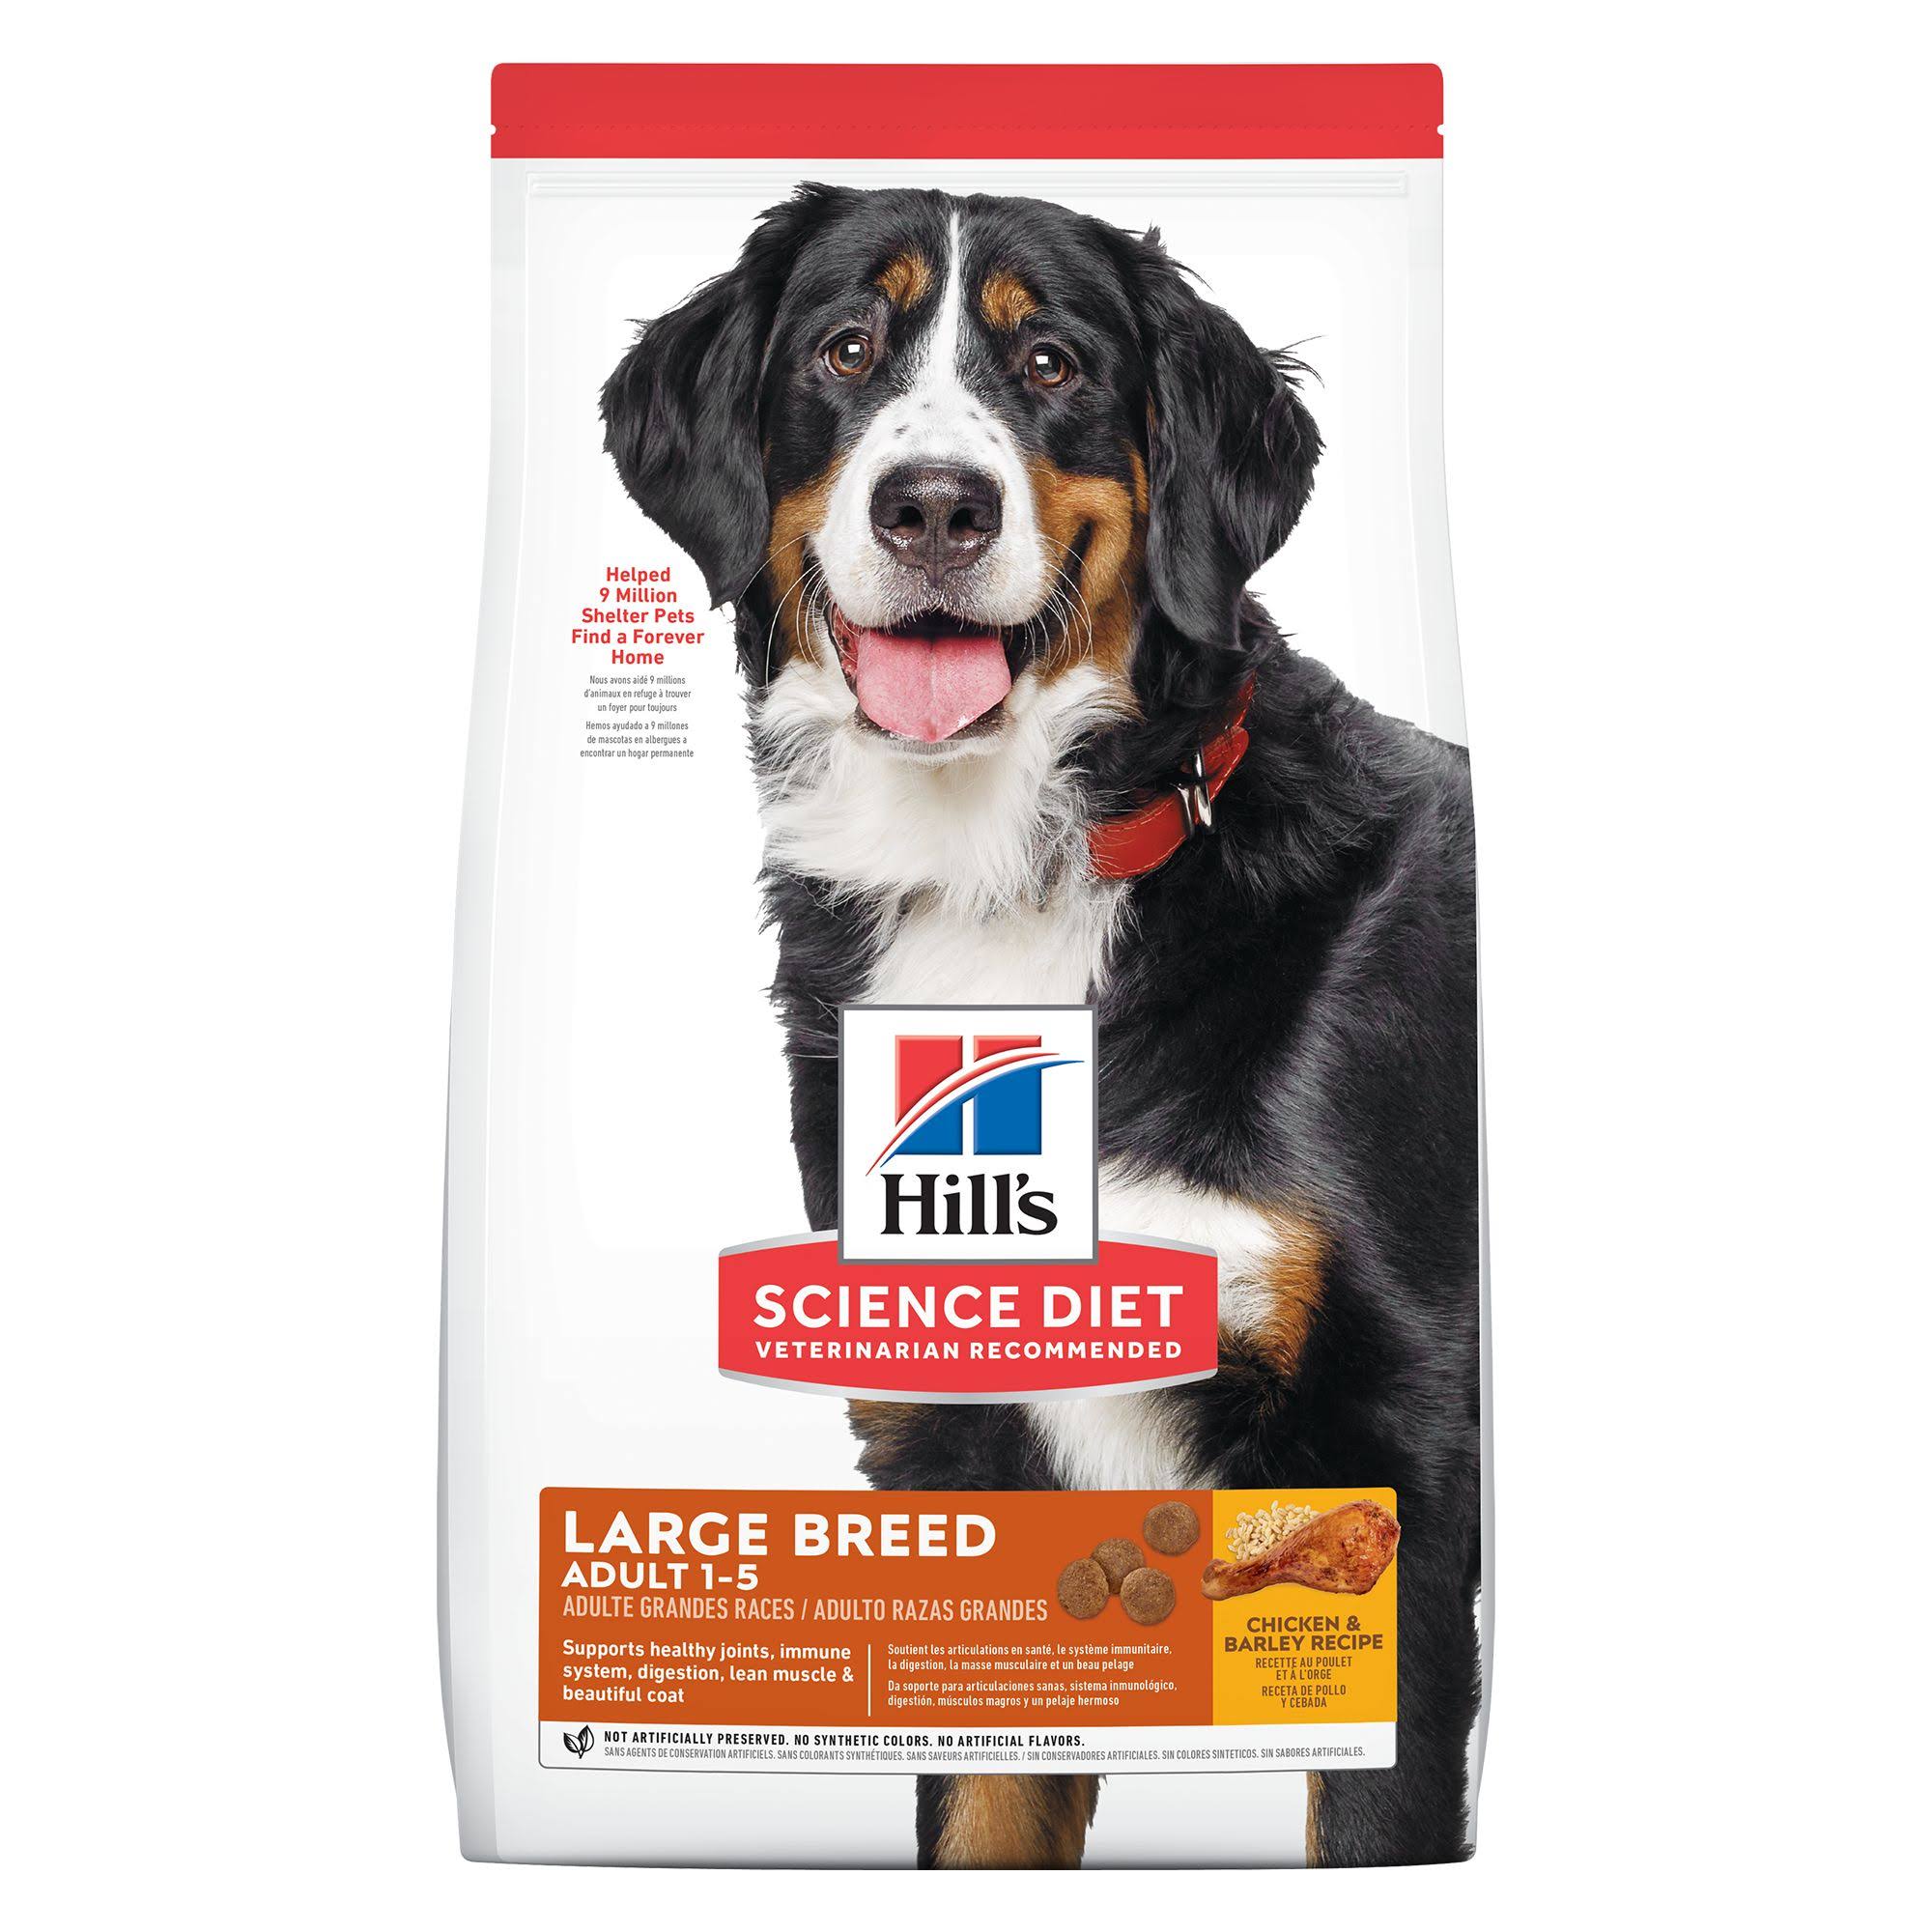 Hill's Science Diet Large Breed Adult Dog Food - Chicken & Barley